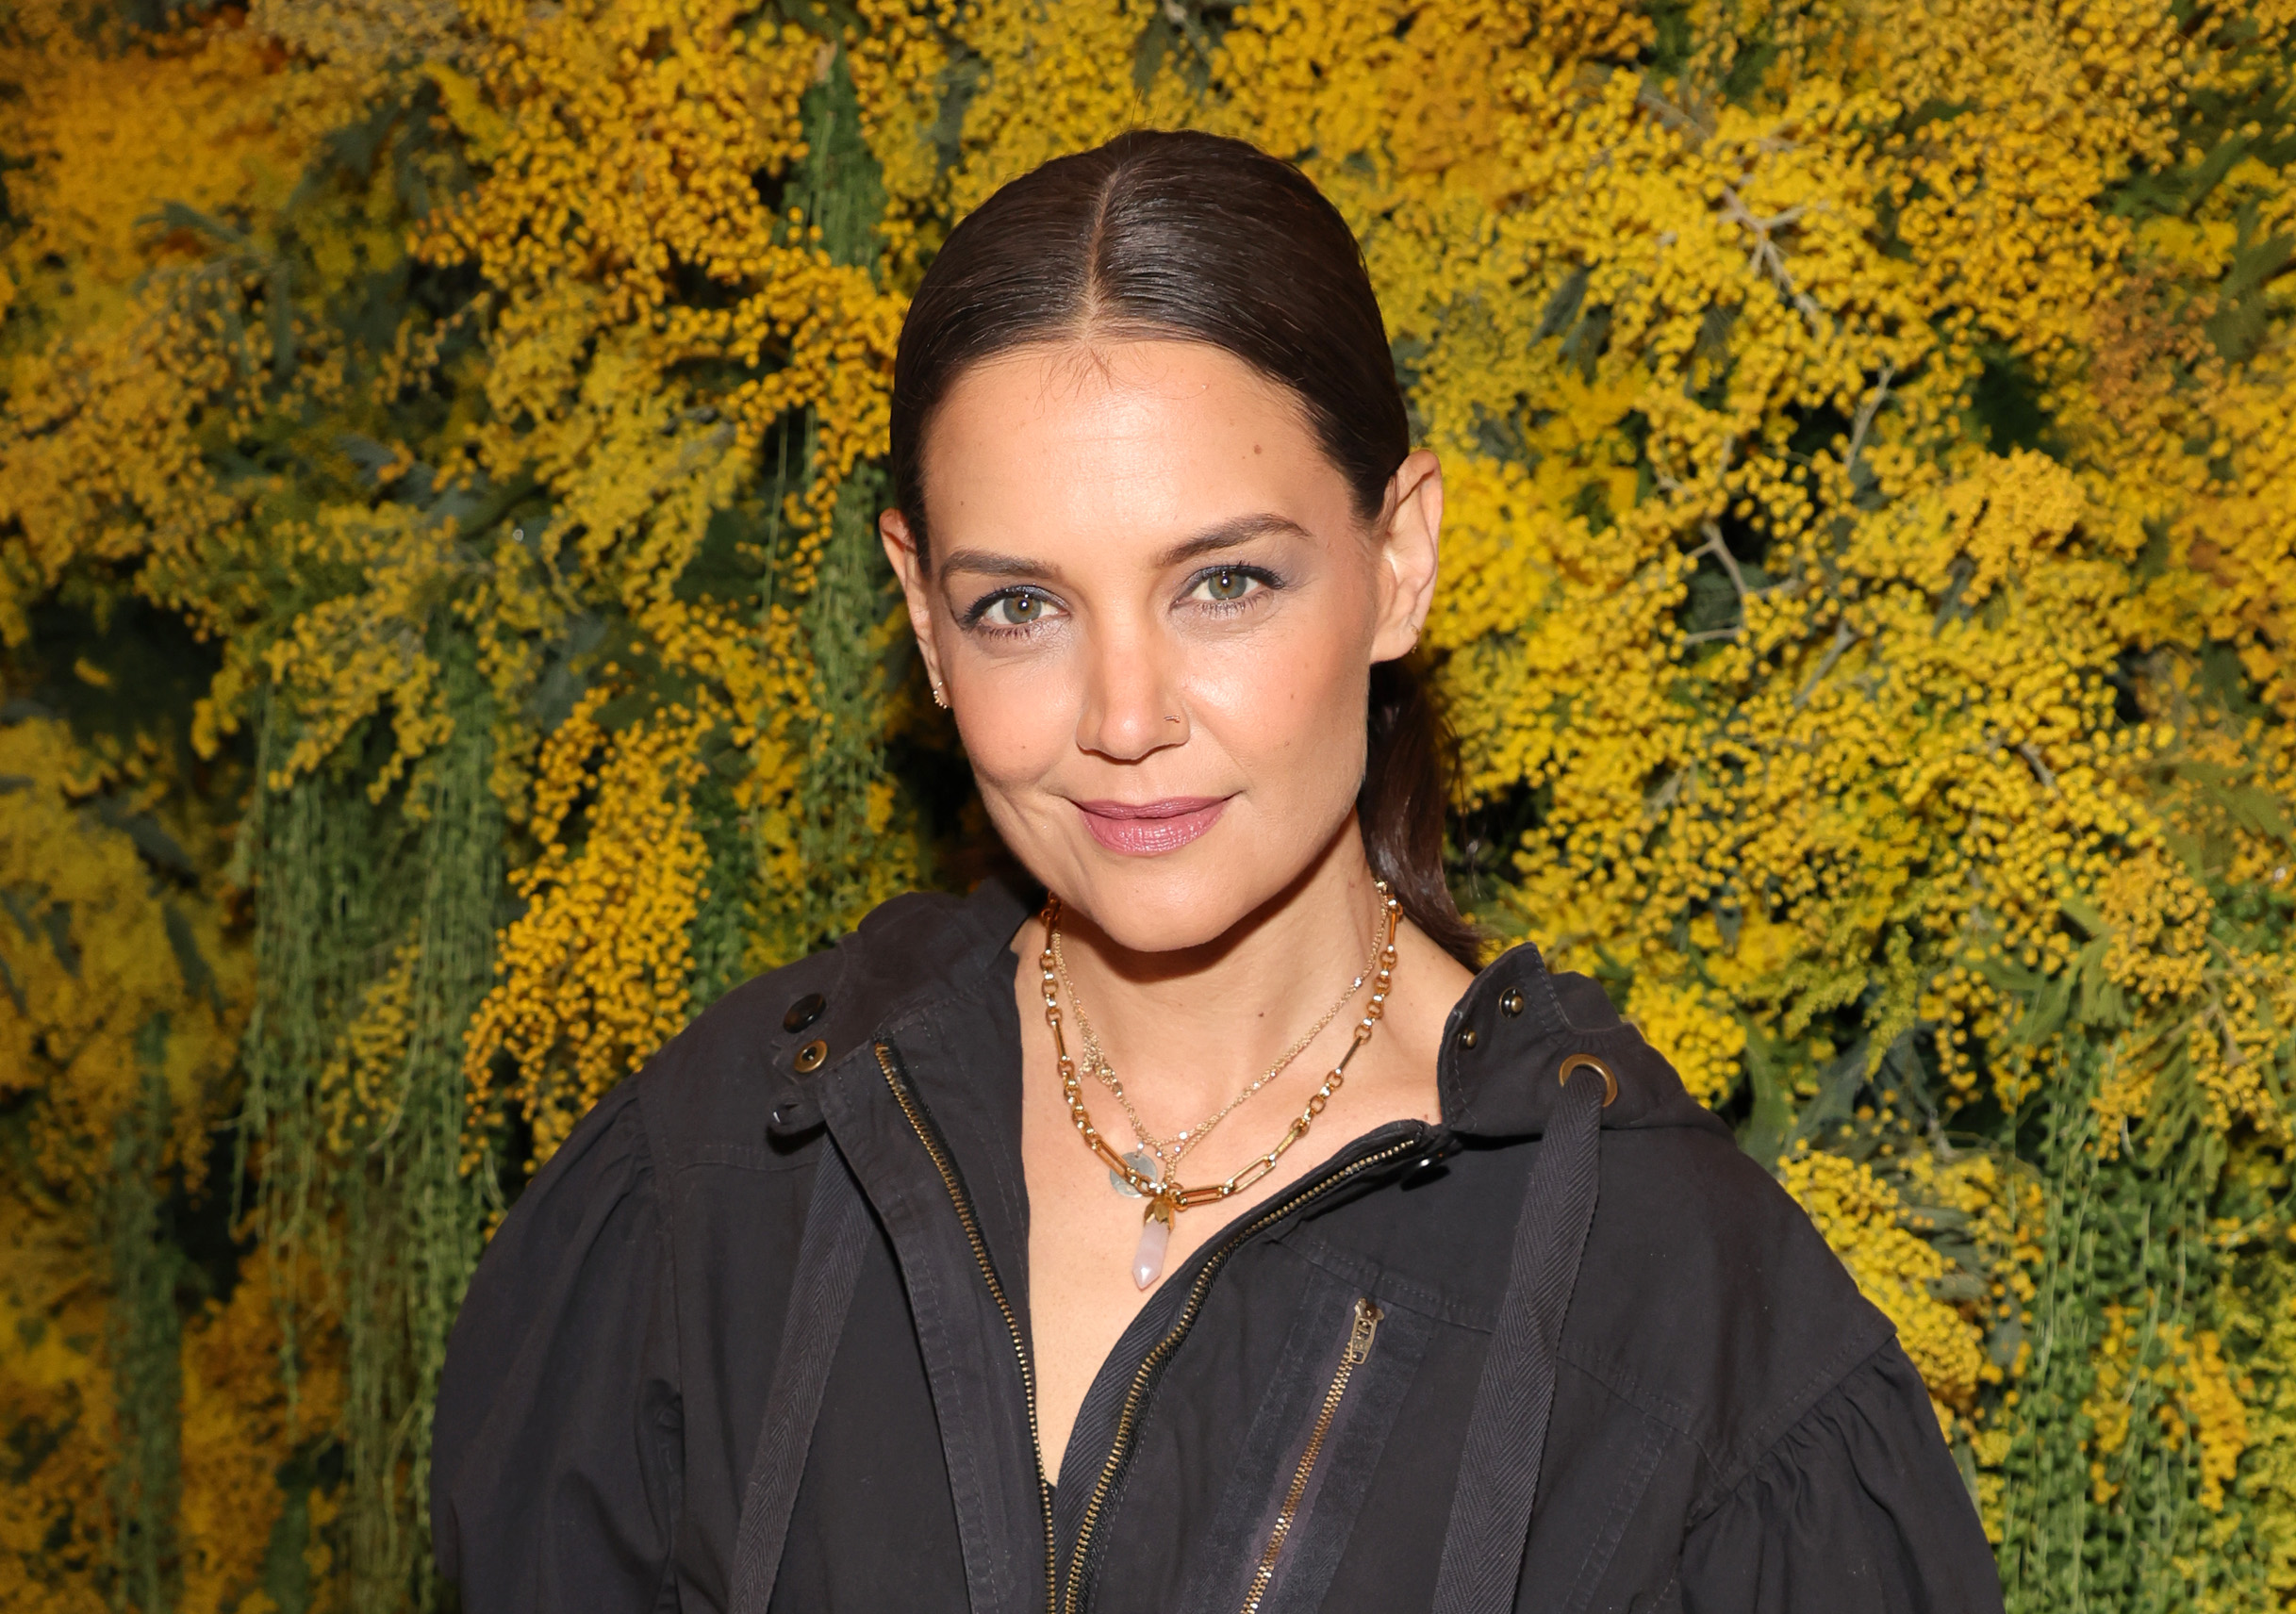 Why Did Katie Holmes Leave The Batman Movies?